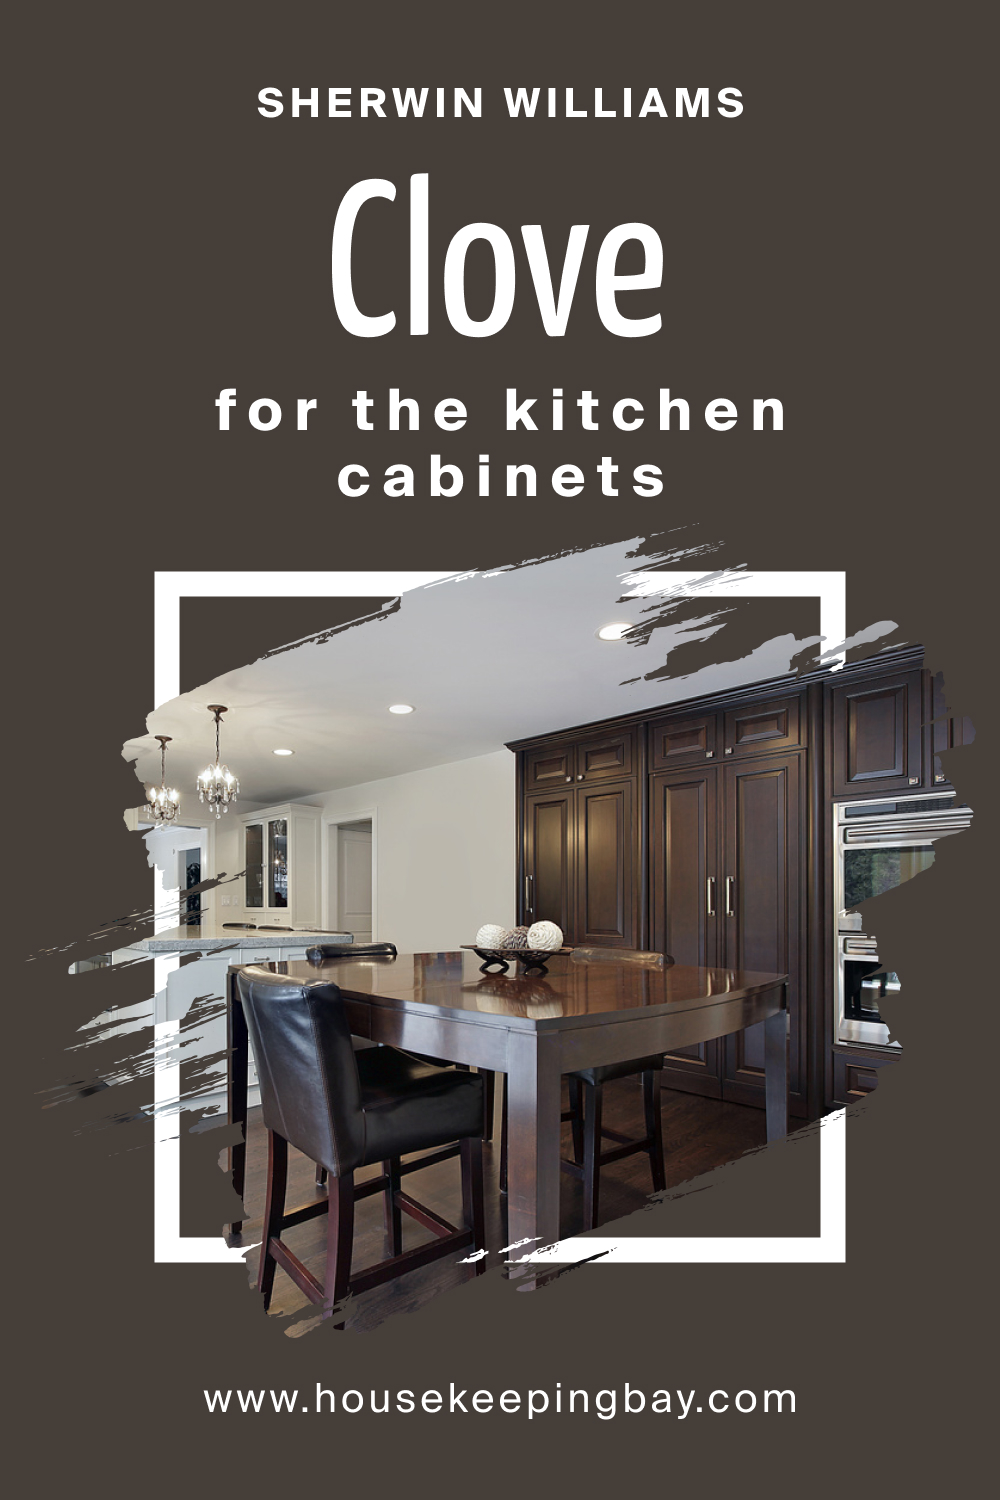 Sherwin Williams. SW 9605 Clove For the Kitchen Cabinets